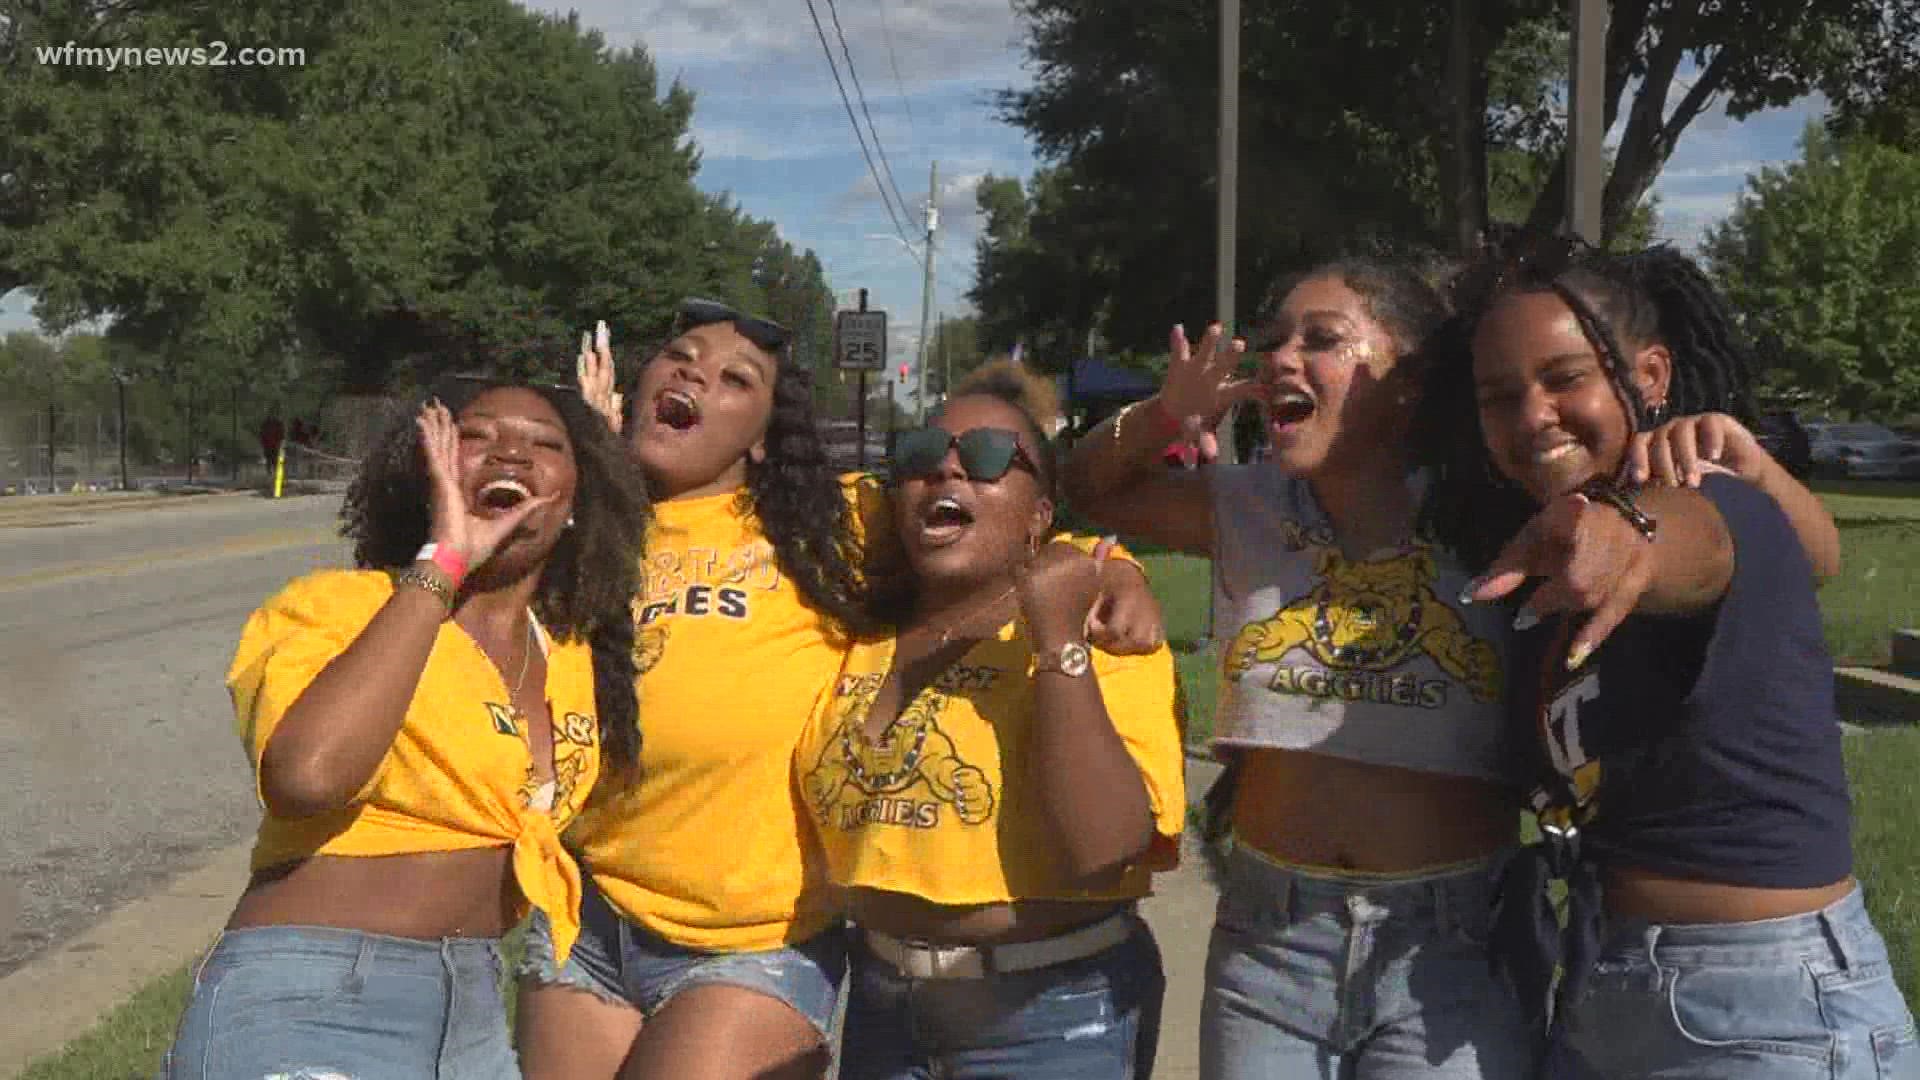 North Carolina A&T fans celebrate first home football game in almost